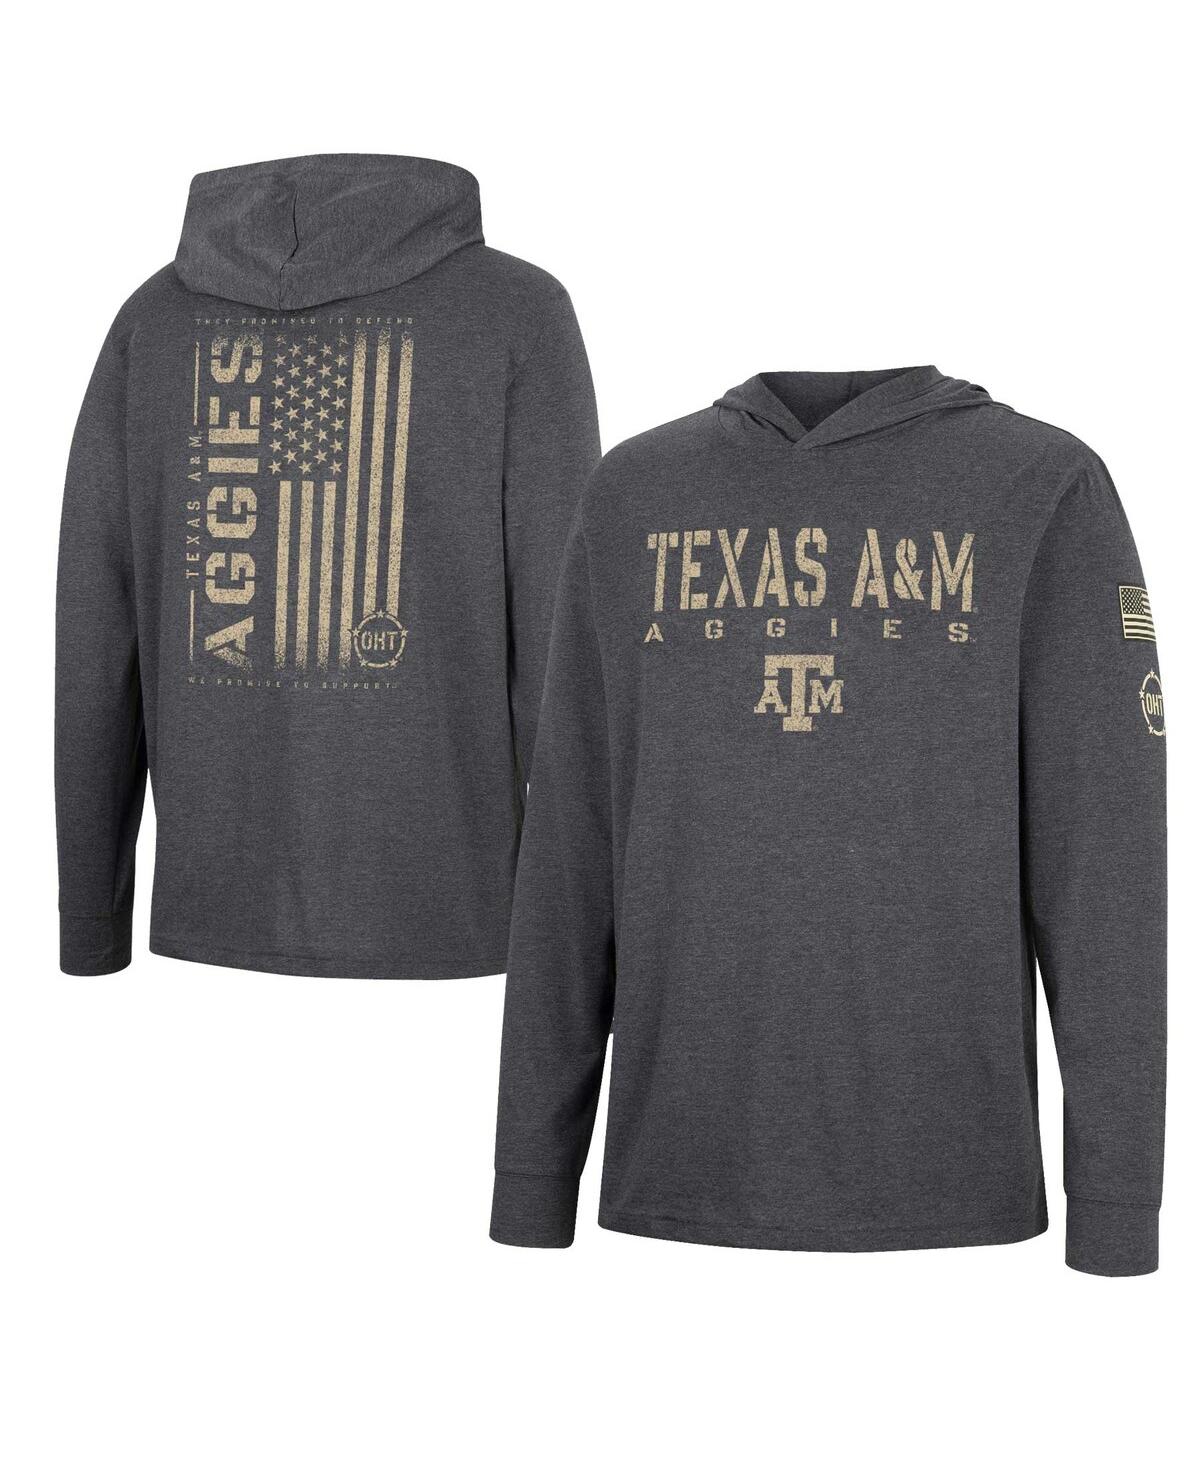 Colosseum Men's  Charcoal Texas A&m Aggies Team Oht Military-inspired Appreciation Hoodie Long Sleeve